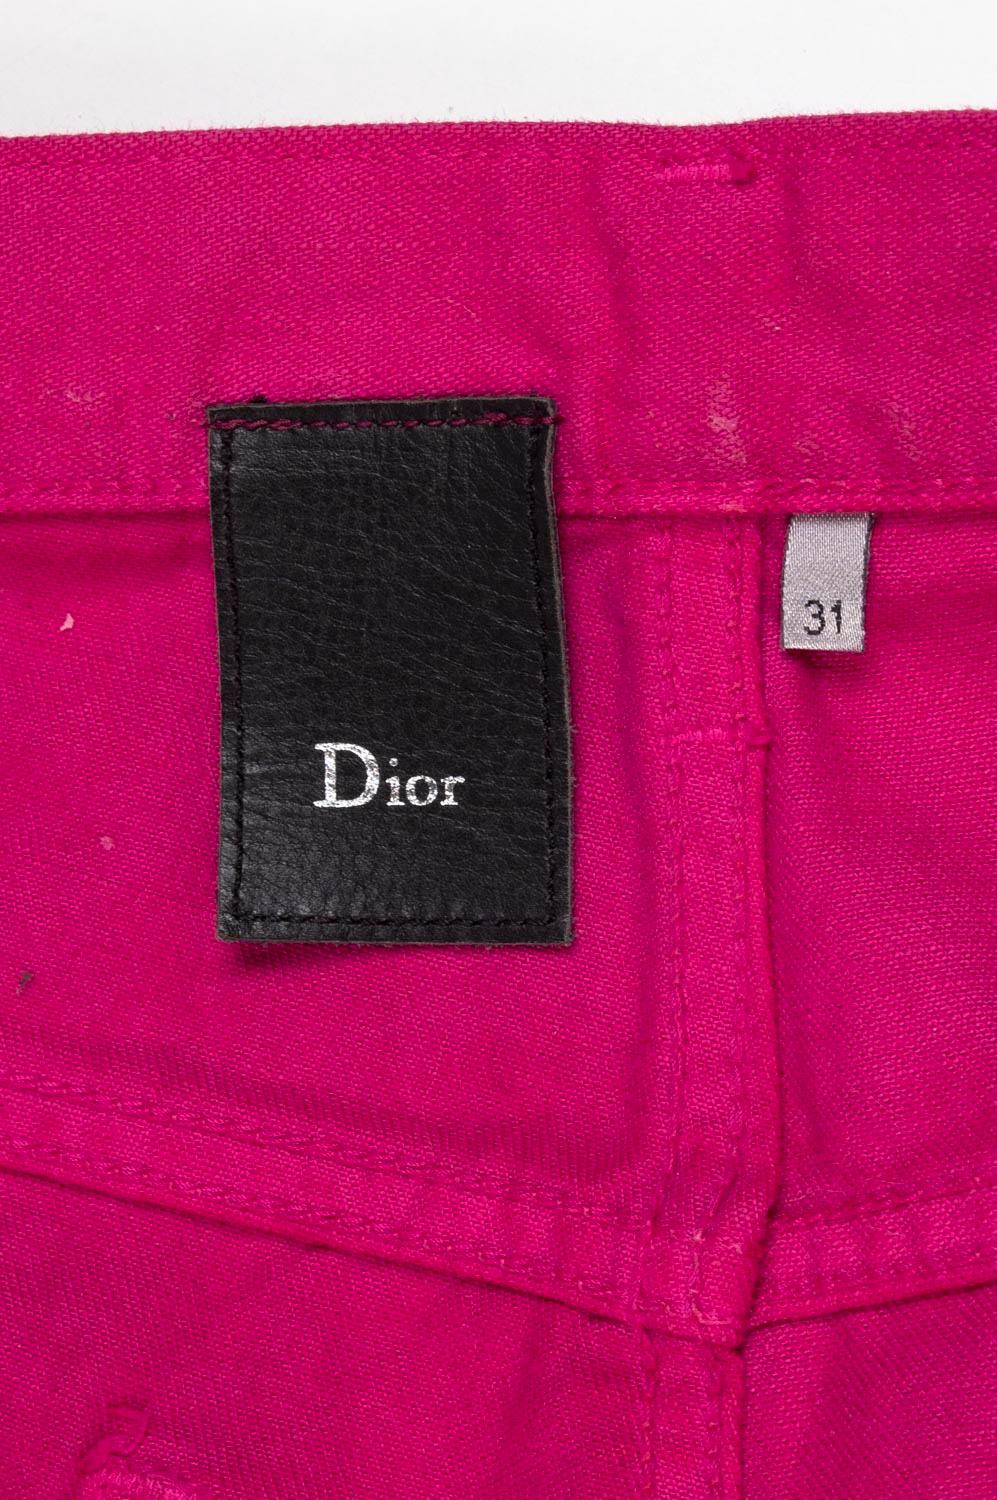 Dior Homme Shiny Glitter Men Jeans Size 31W In Excellent Condition For Sale In Kaunas, LT